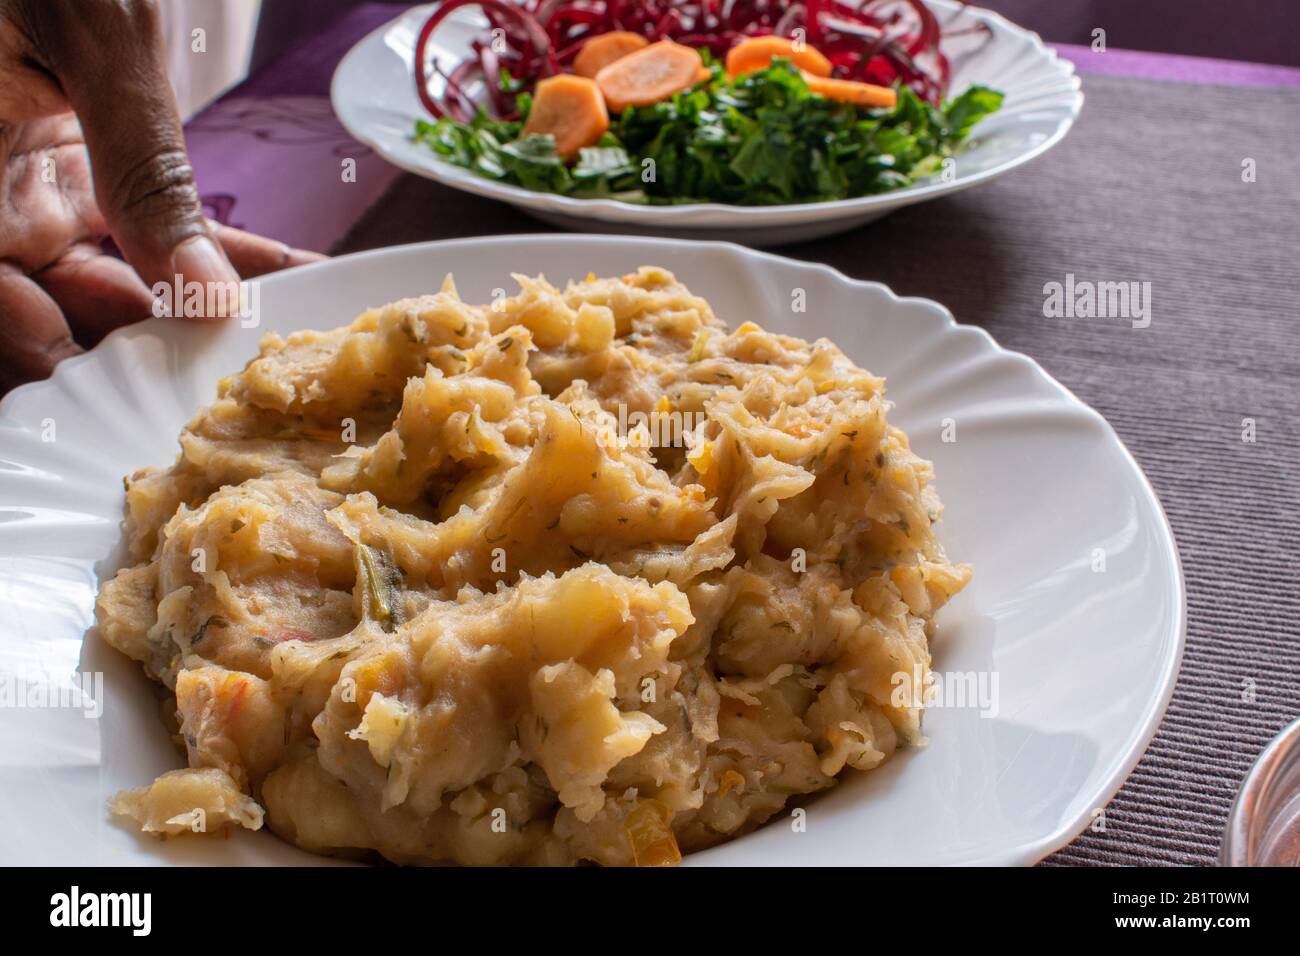 a plate of matoke being held by a hand on a table Stock Photo